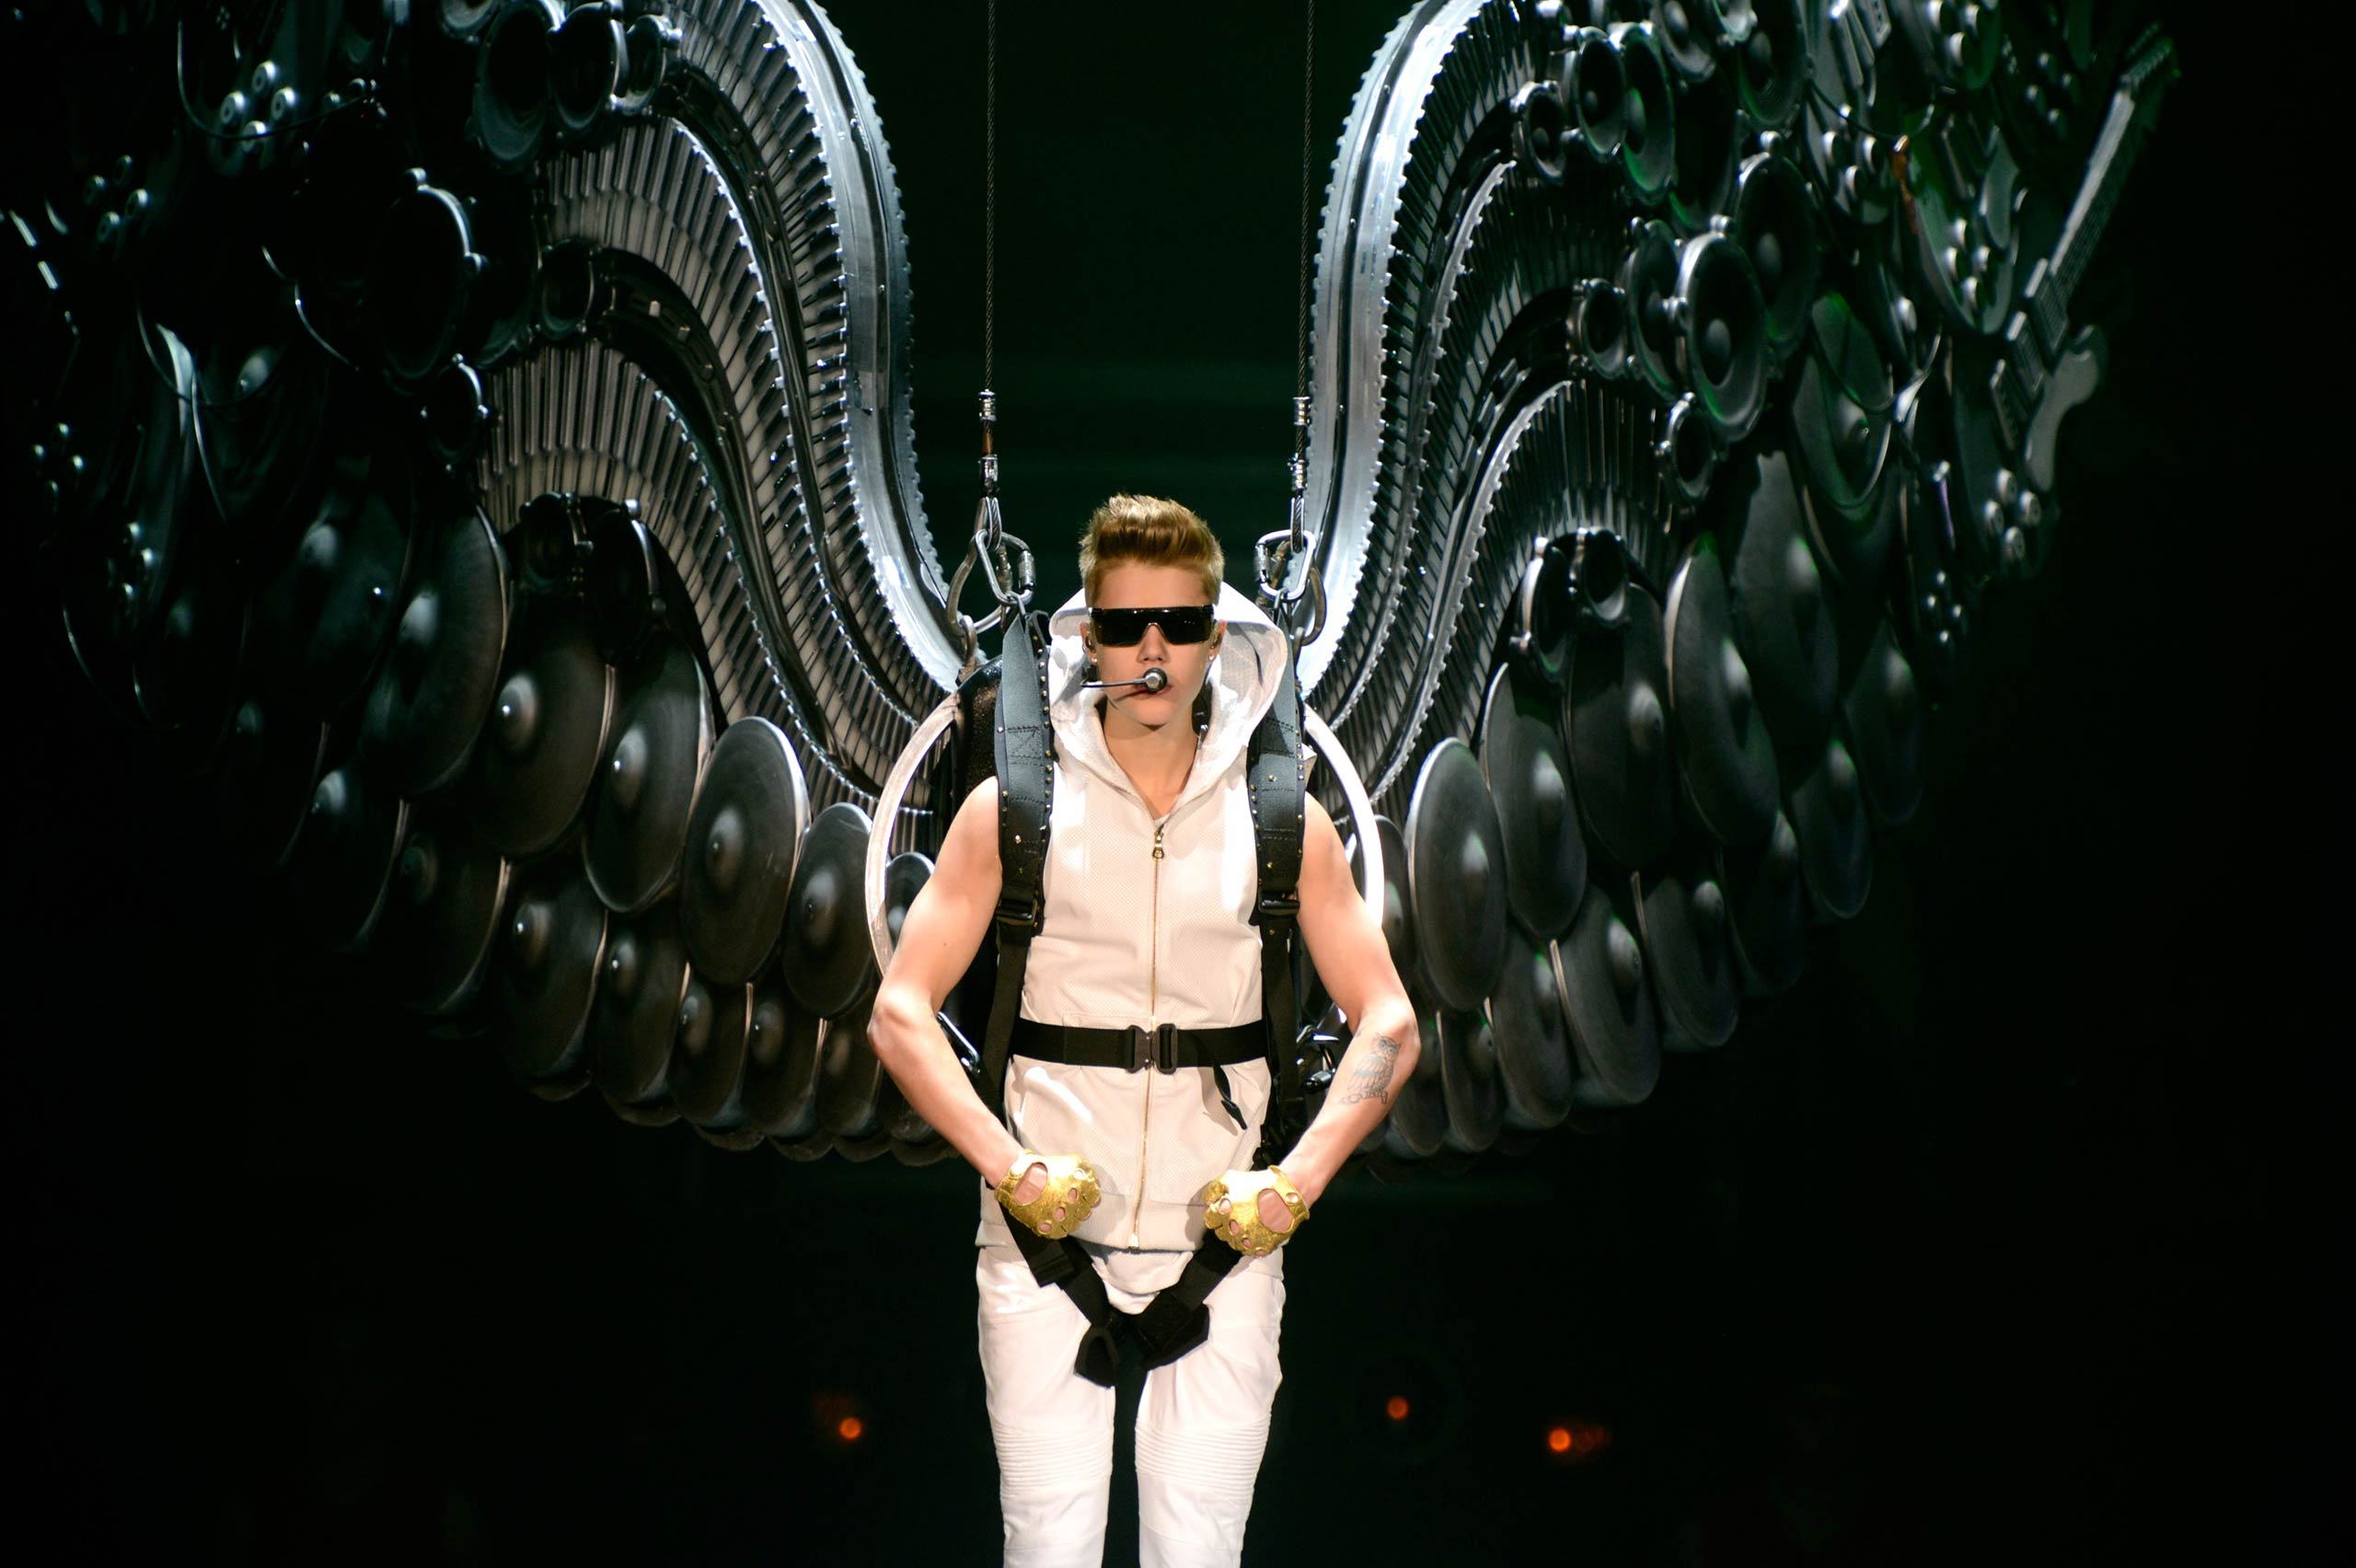 Justin Bieber performs at Madison Square Garden in New York City in 2012.